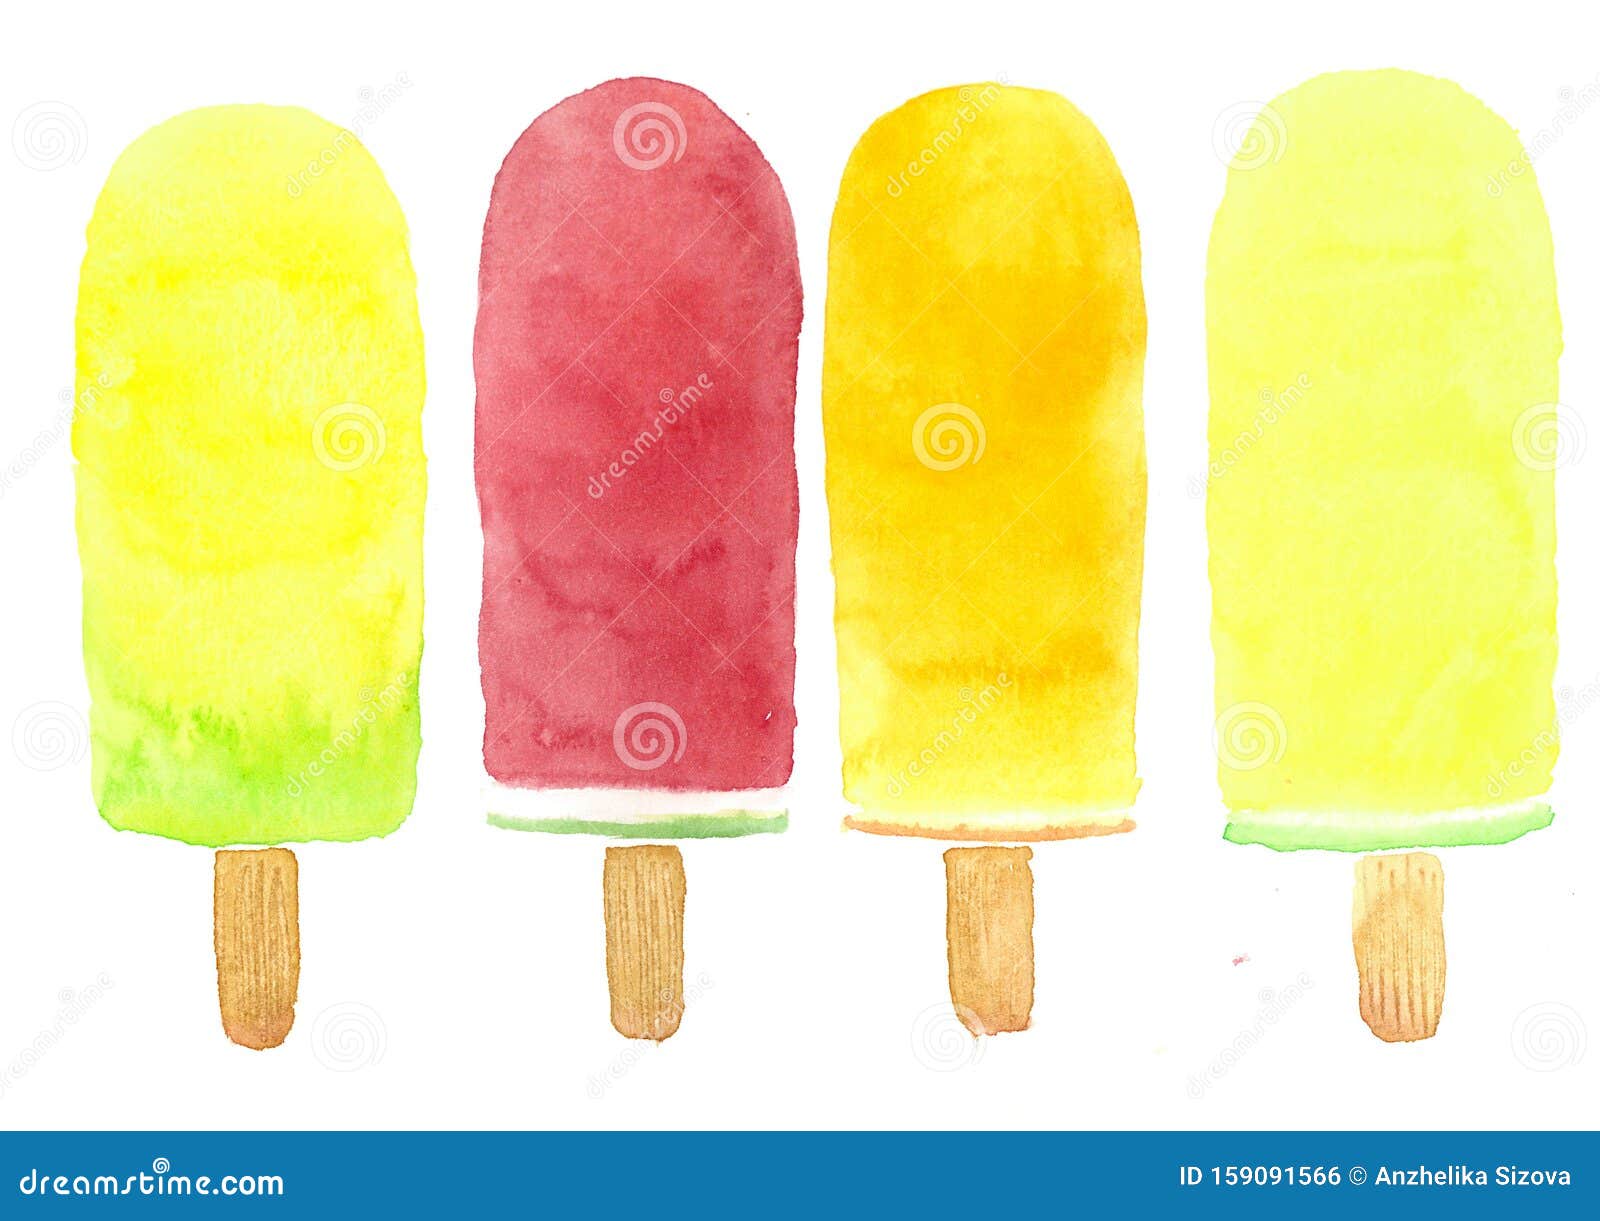 Aquarelle Colorful Simple Ice Cream Drawing Stock Photo Image Of Snack Isolated